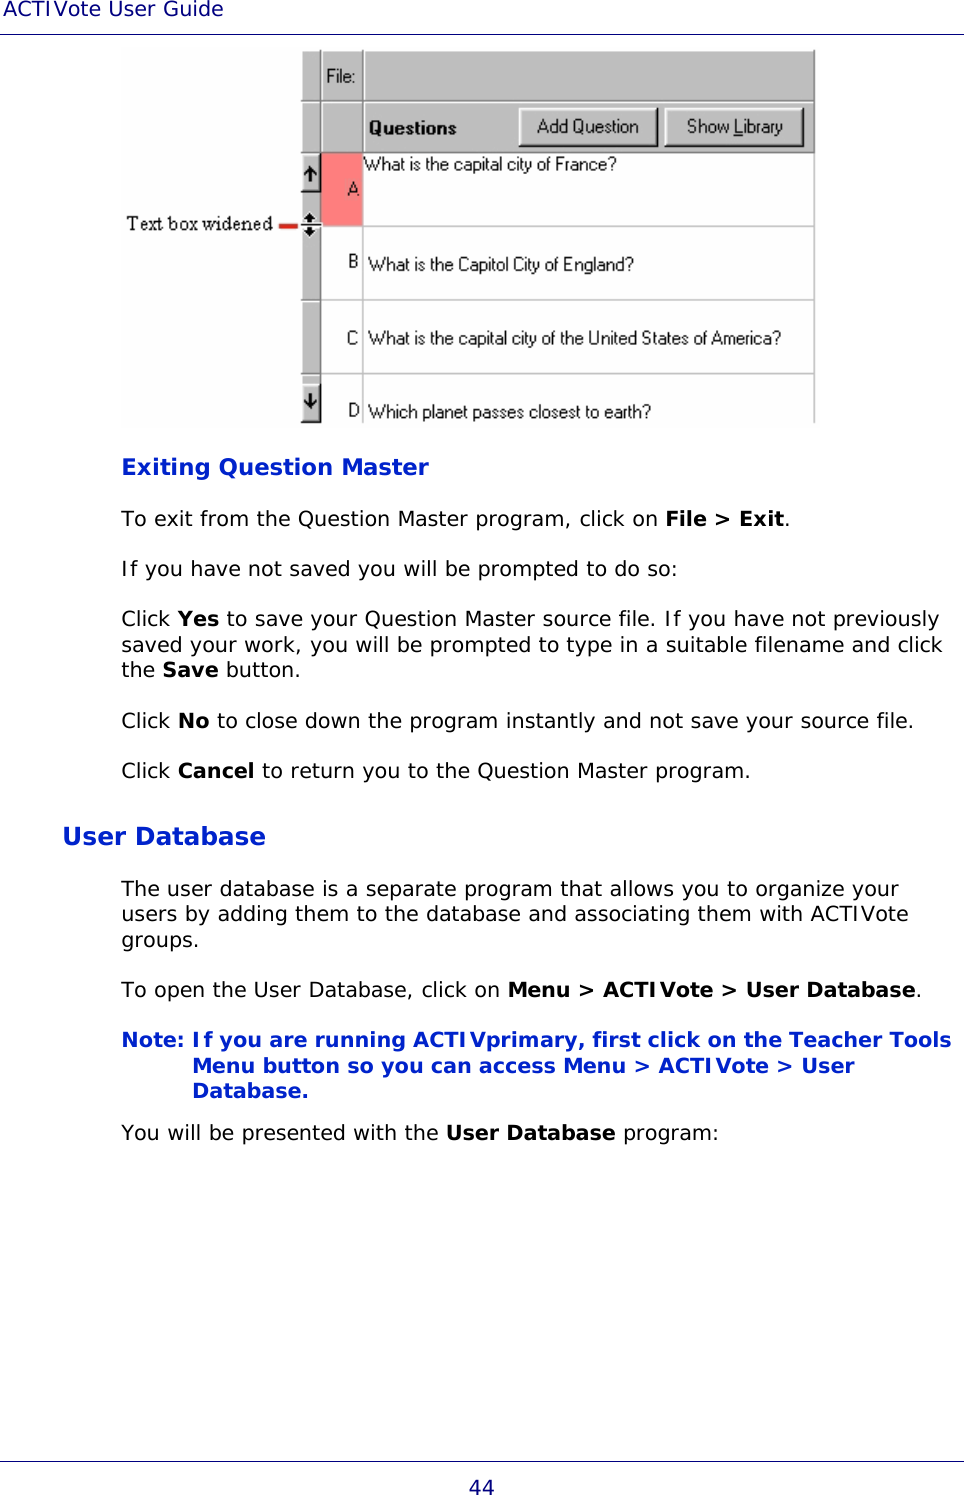 ACTIVote User Guide 44  Exiting Question Master To exit from the Question Master program, click on File &gt; Exit. If you have not saved you will be prompted to do so:  Click Yes to save your Question Master source file. If you have not previously saved your work, you will be prompted to type in a suitable filename and click the Save button.  Click No to close down the program instantly and not save your source file. Click Cancel to return you to the Question Master program. User Database The user database is a separate program that allows you to organize your users by adding them to the database and associating them with ACTIVote groups. To open the User Database, click on Menu &gt; ACTIVote &gt; User Database. Note: If you are running ACTIVprimary, first click on the Teacher Tools Menu button so you can access Menu &gt; ACTIVote &gt; User Database. You will be presented with the User Database program: 